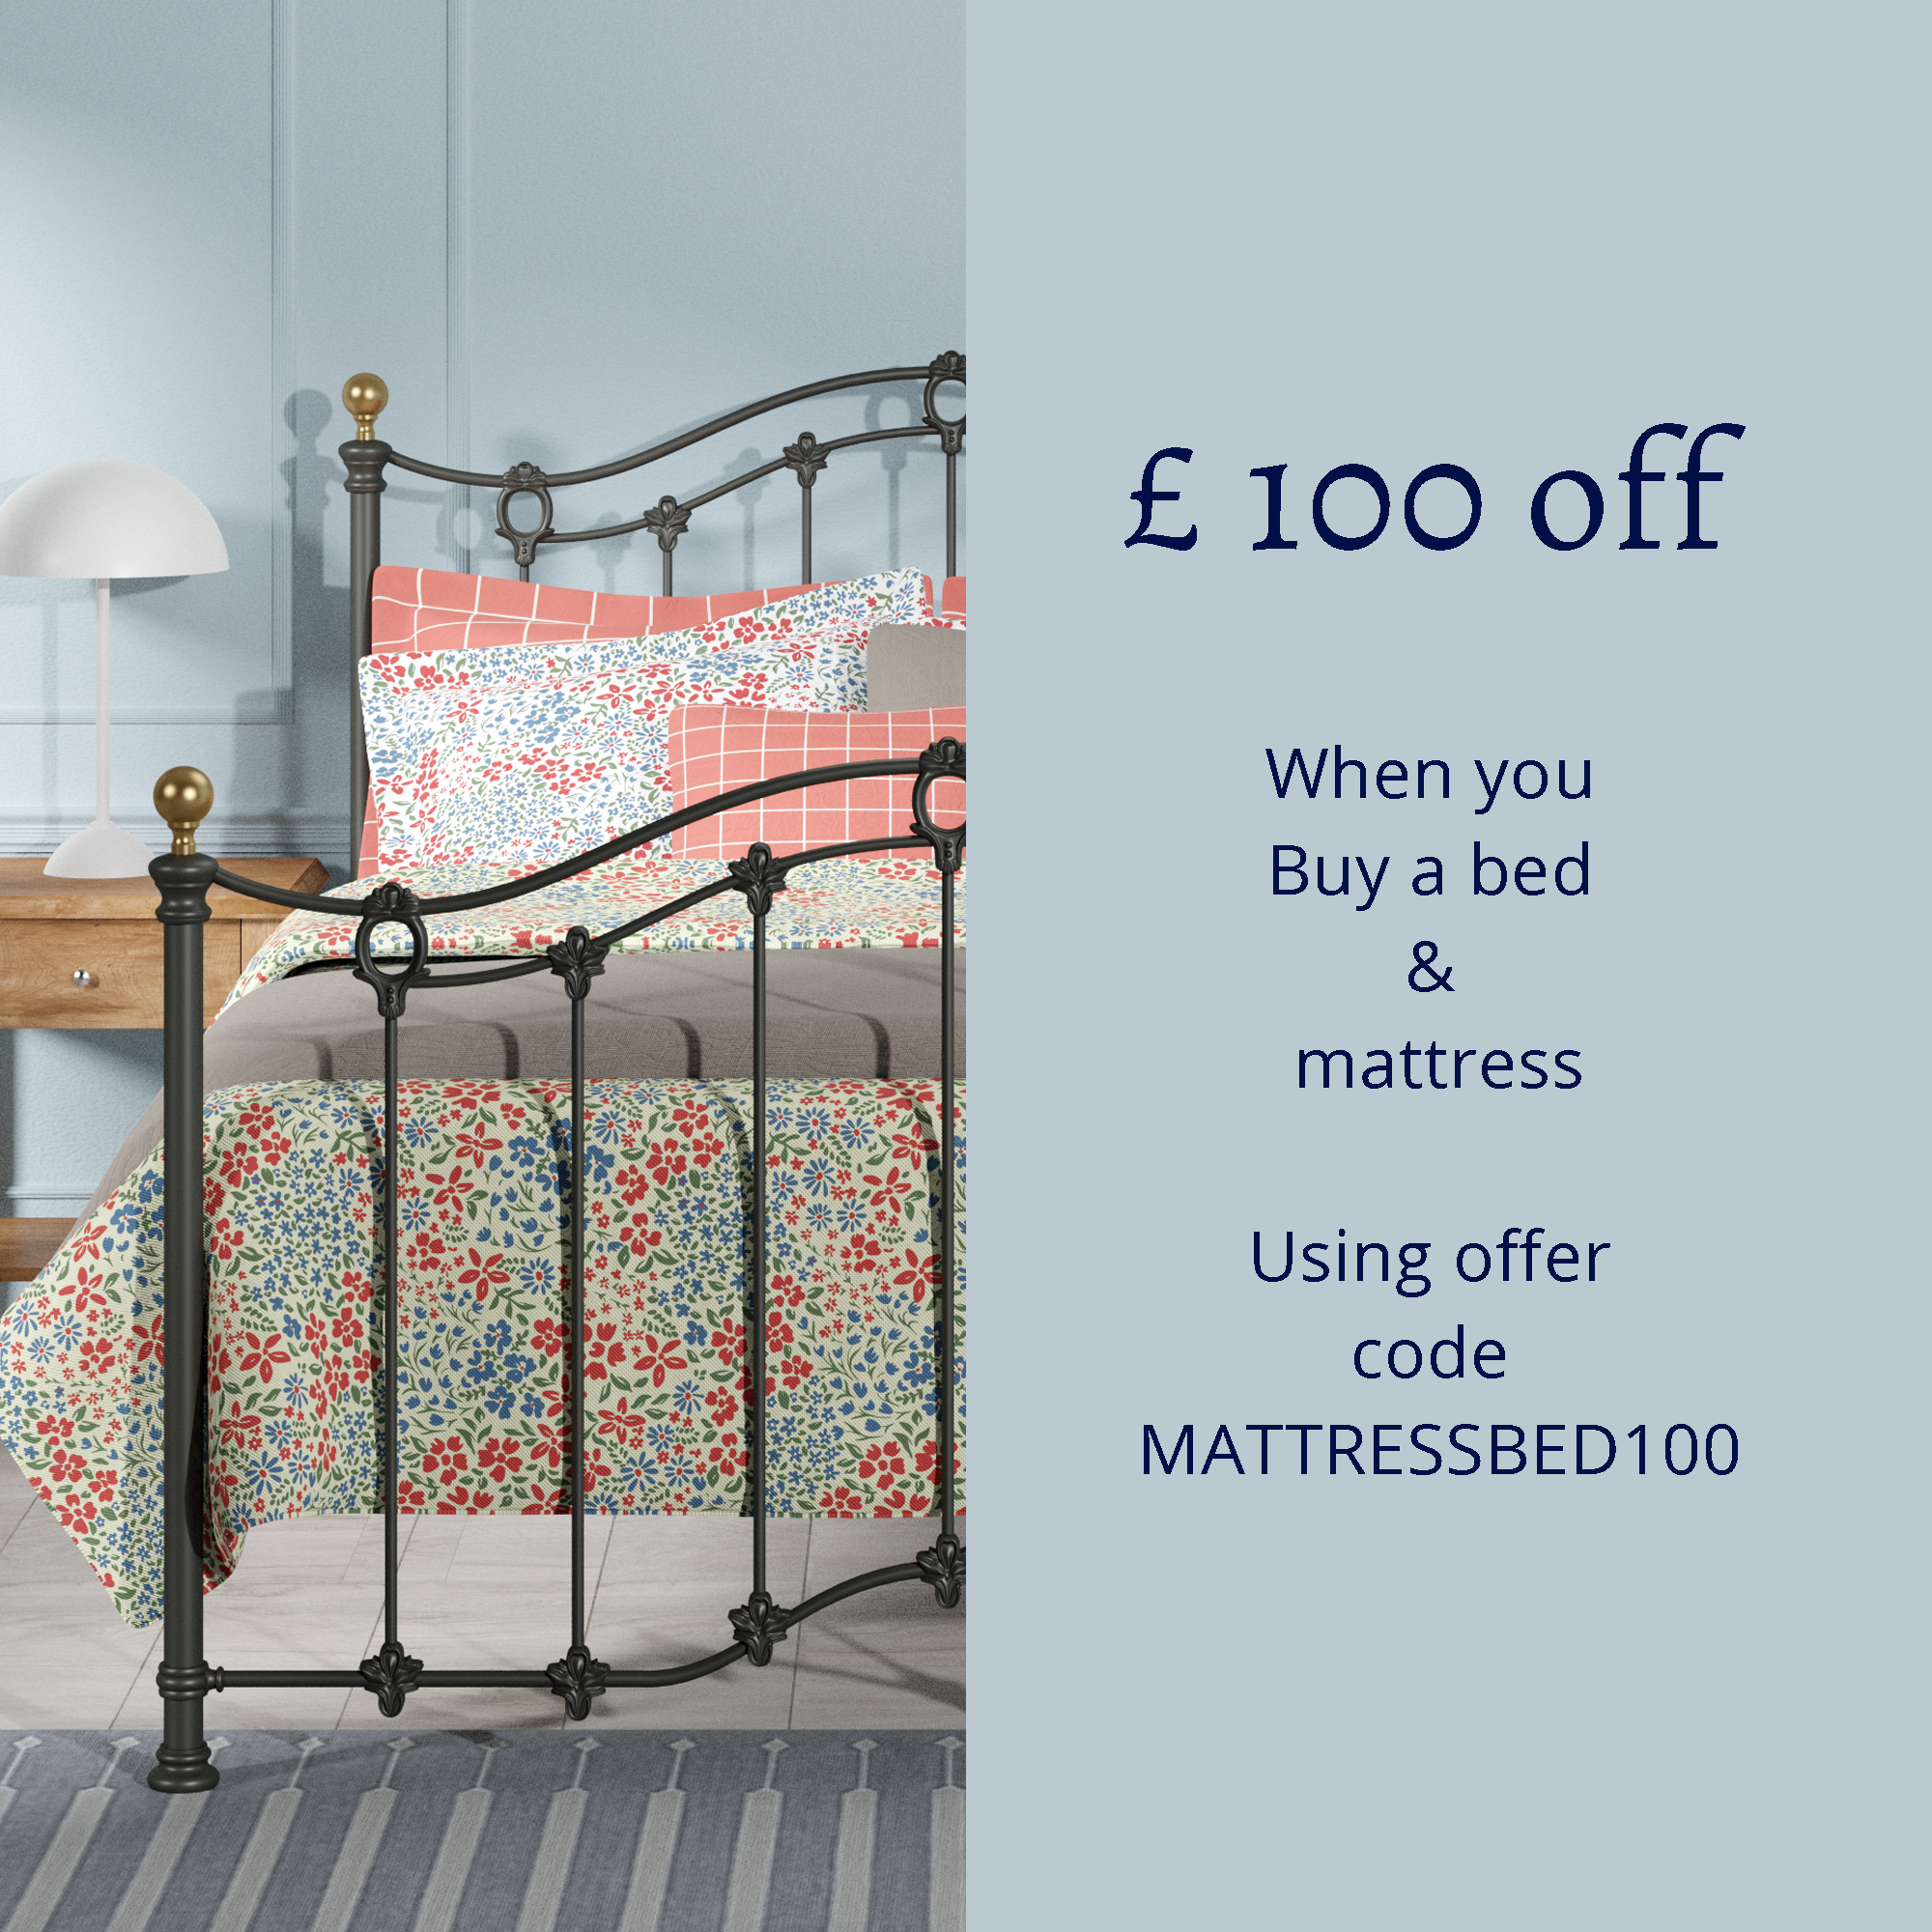 Metal beds and iron bed frames by The Original Bed Co